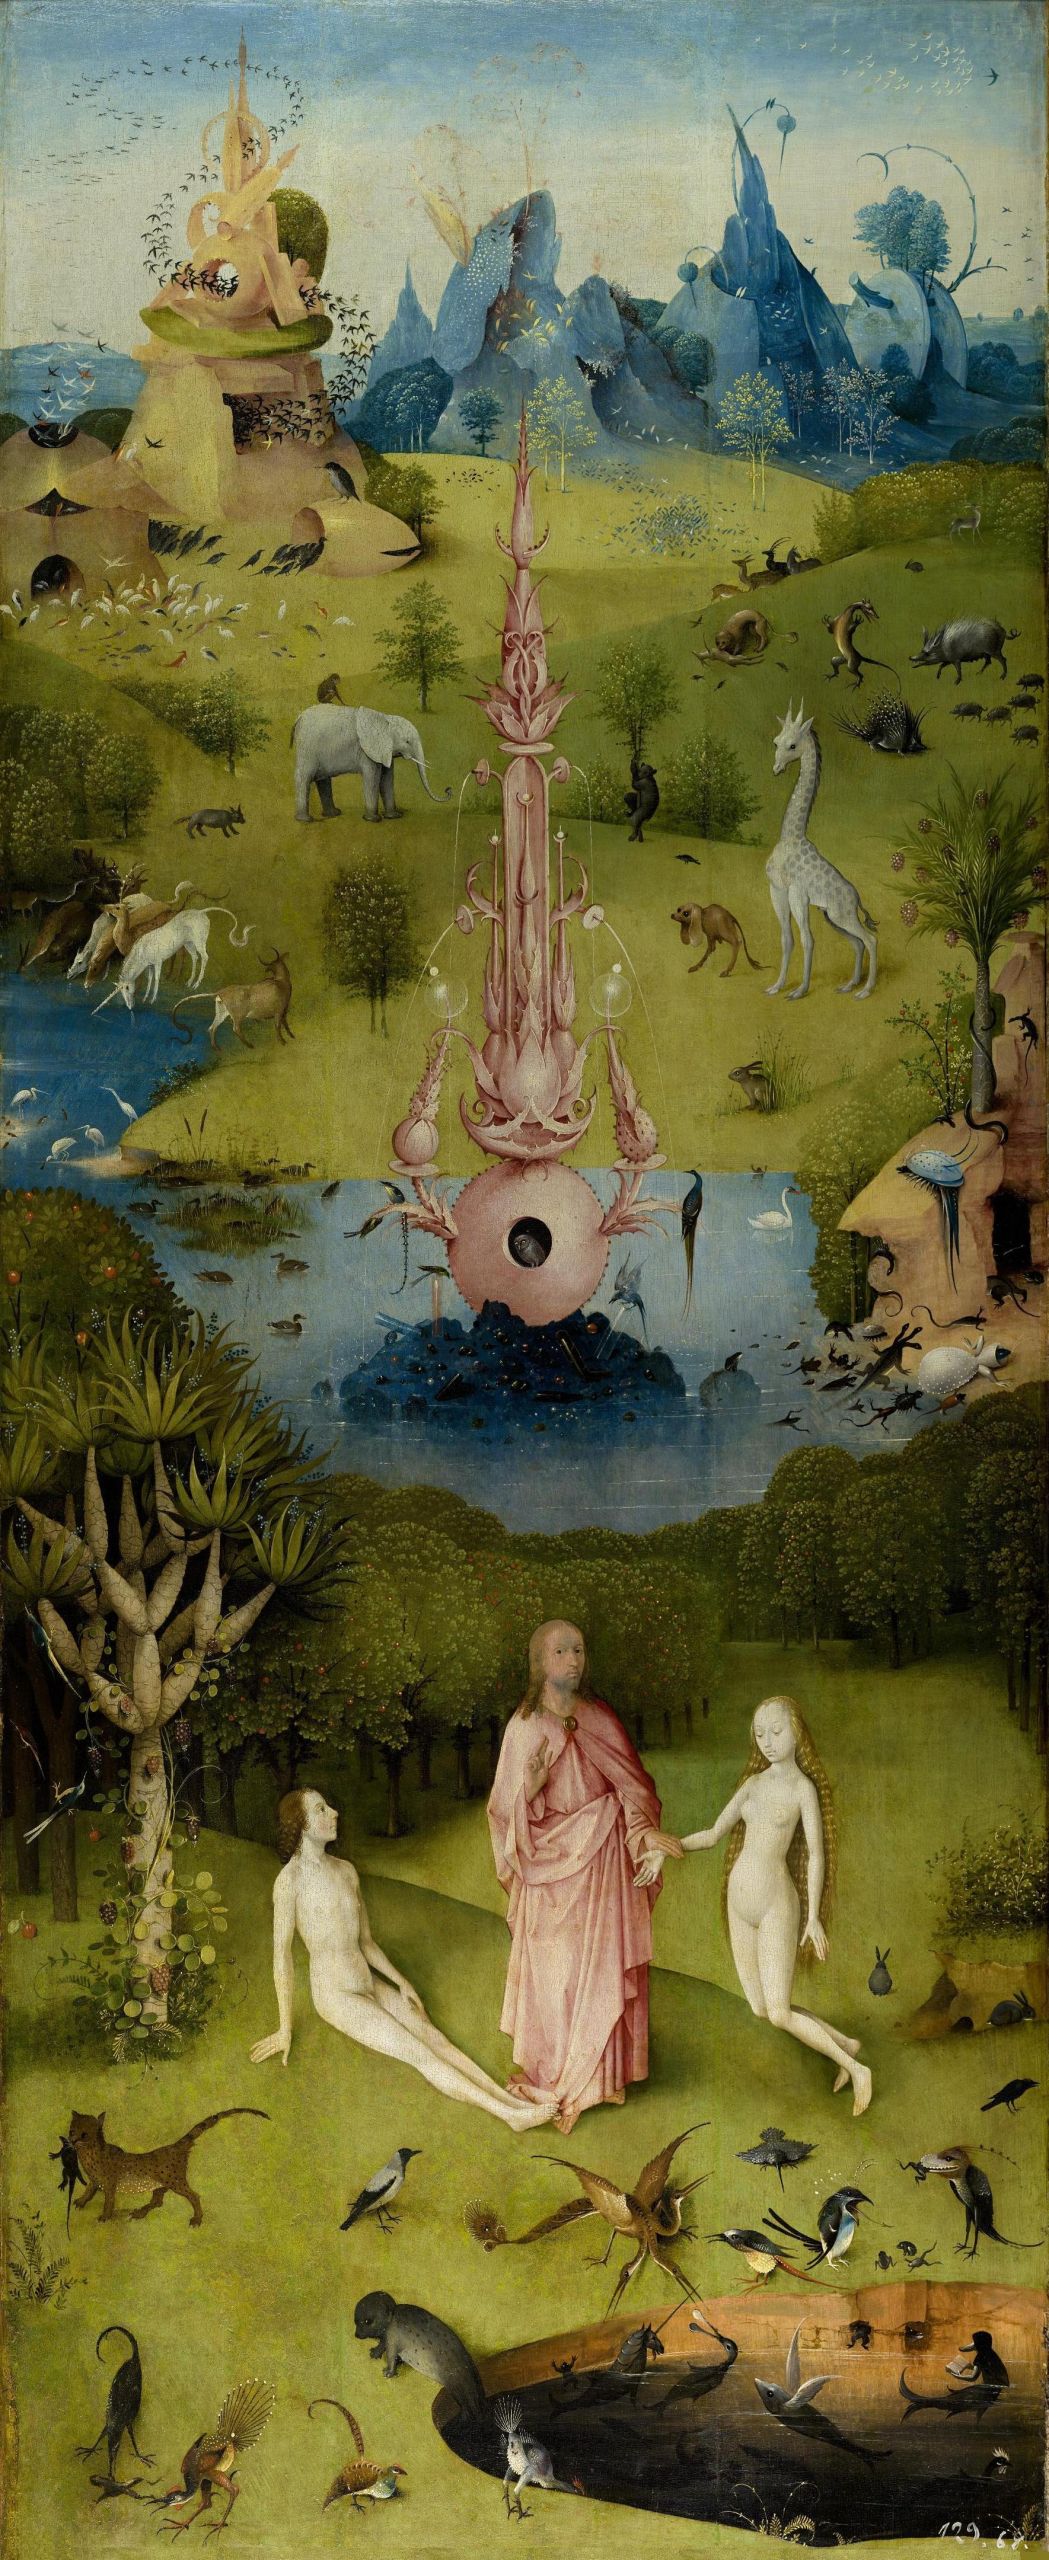 Hieronymus Bosch The Garden of Earthly Delights The Earthly Paradise Garden of Eden